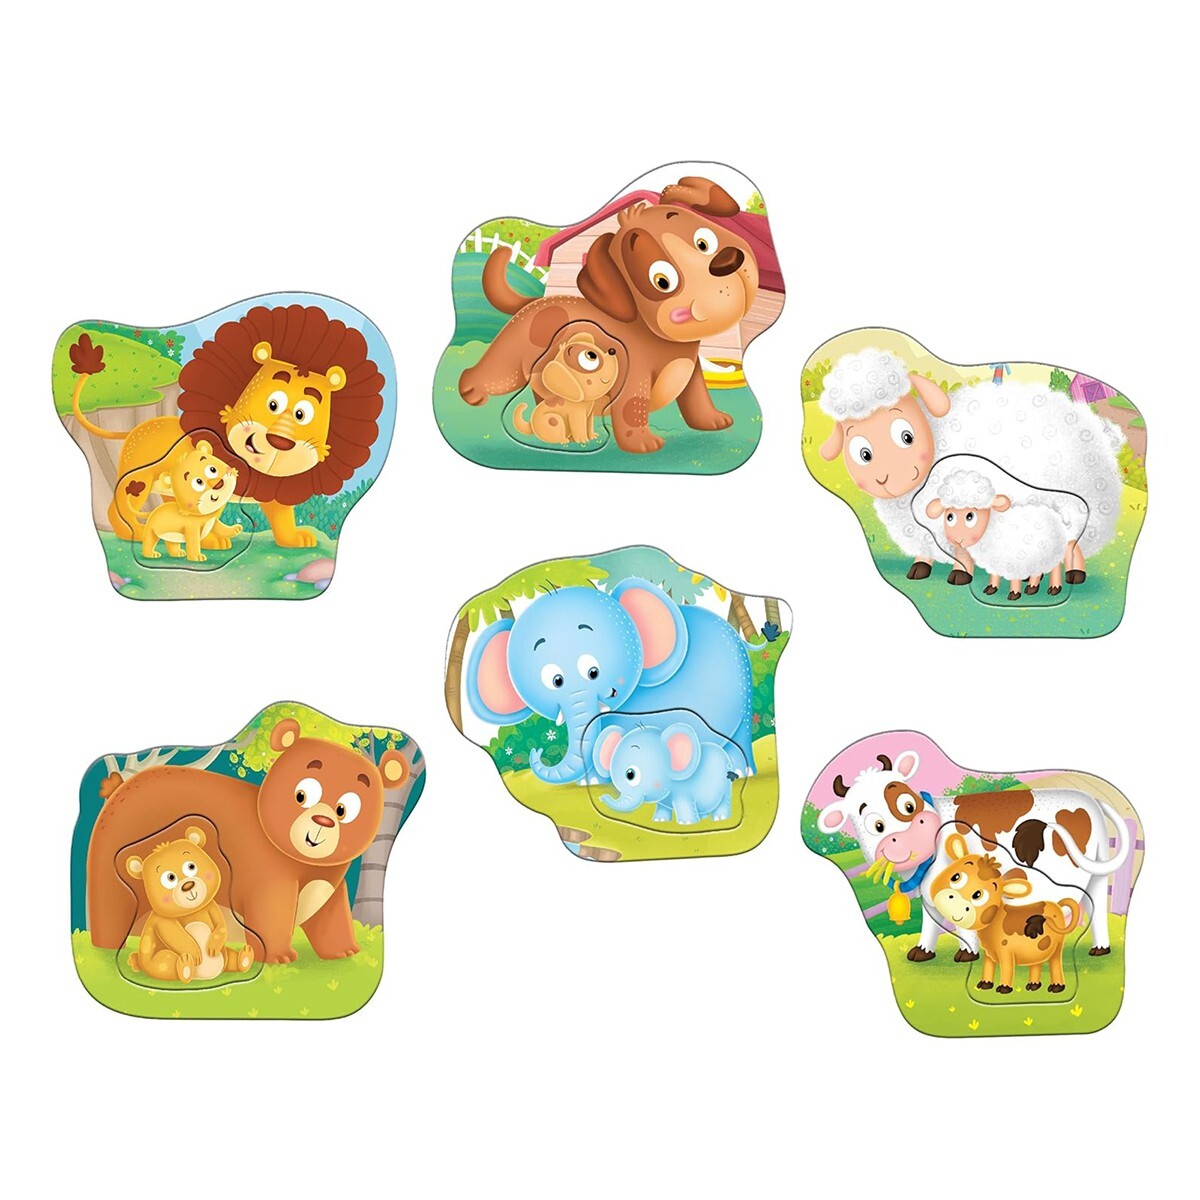 Frank Early Puzzle Animals&Babies-32902